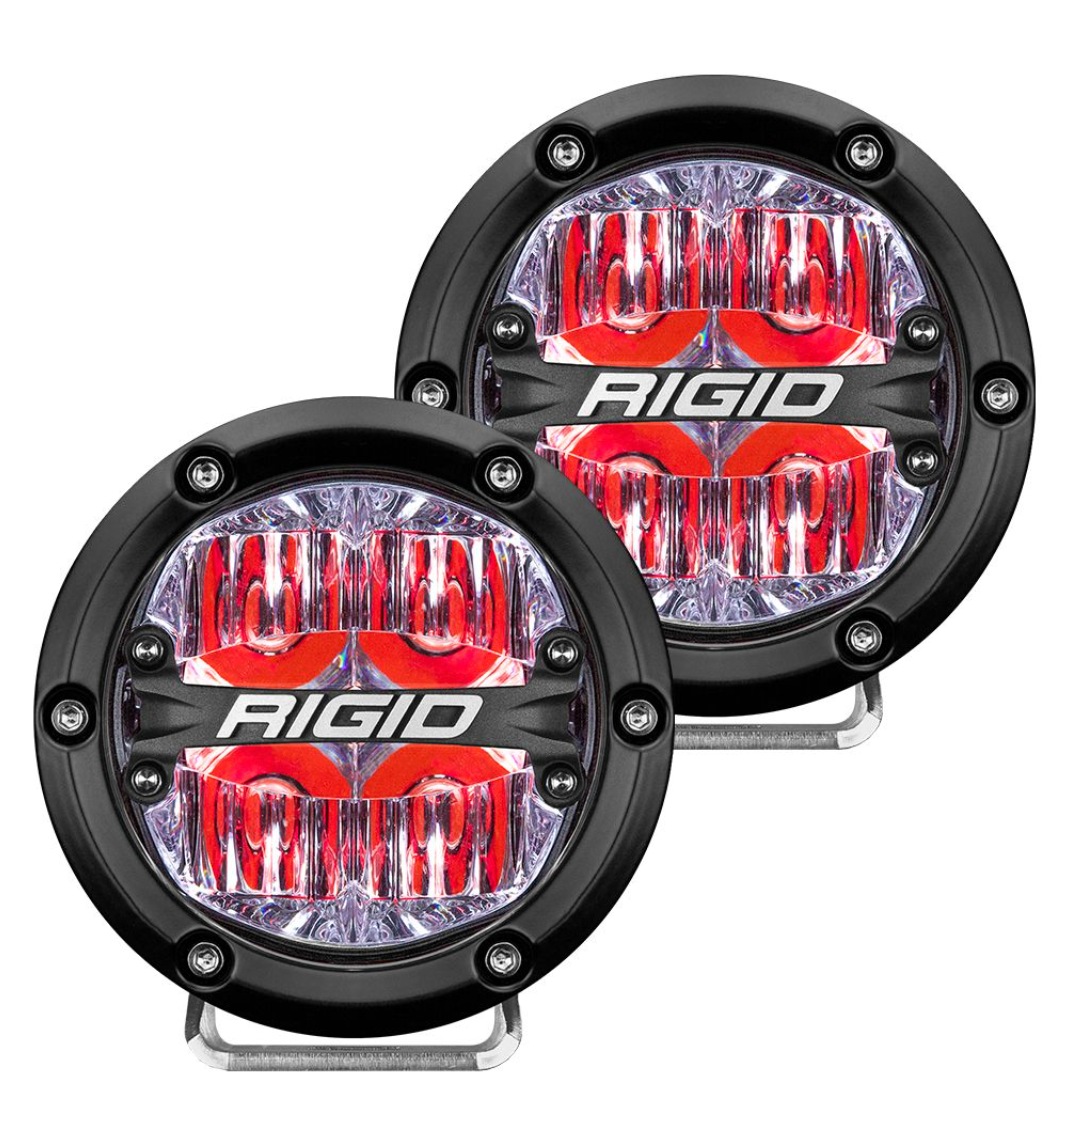 Rigid Industries 360-Series 4 Inch Led  Off-Road  Drive Beam White Red Blue Amber  Backlight Pair RIGID Industries